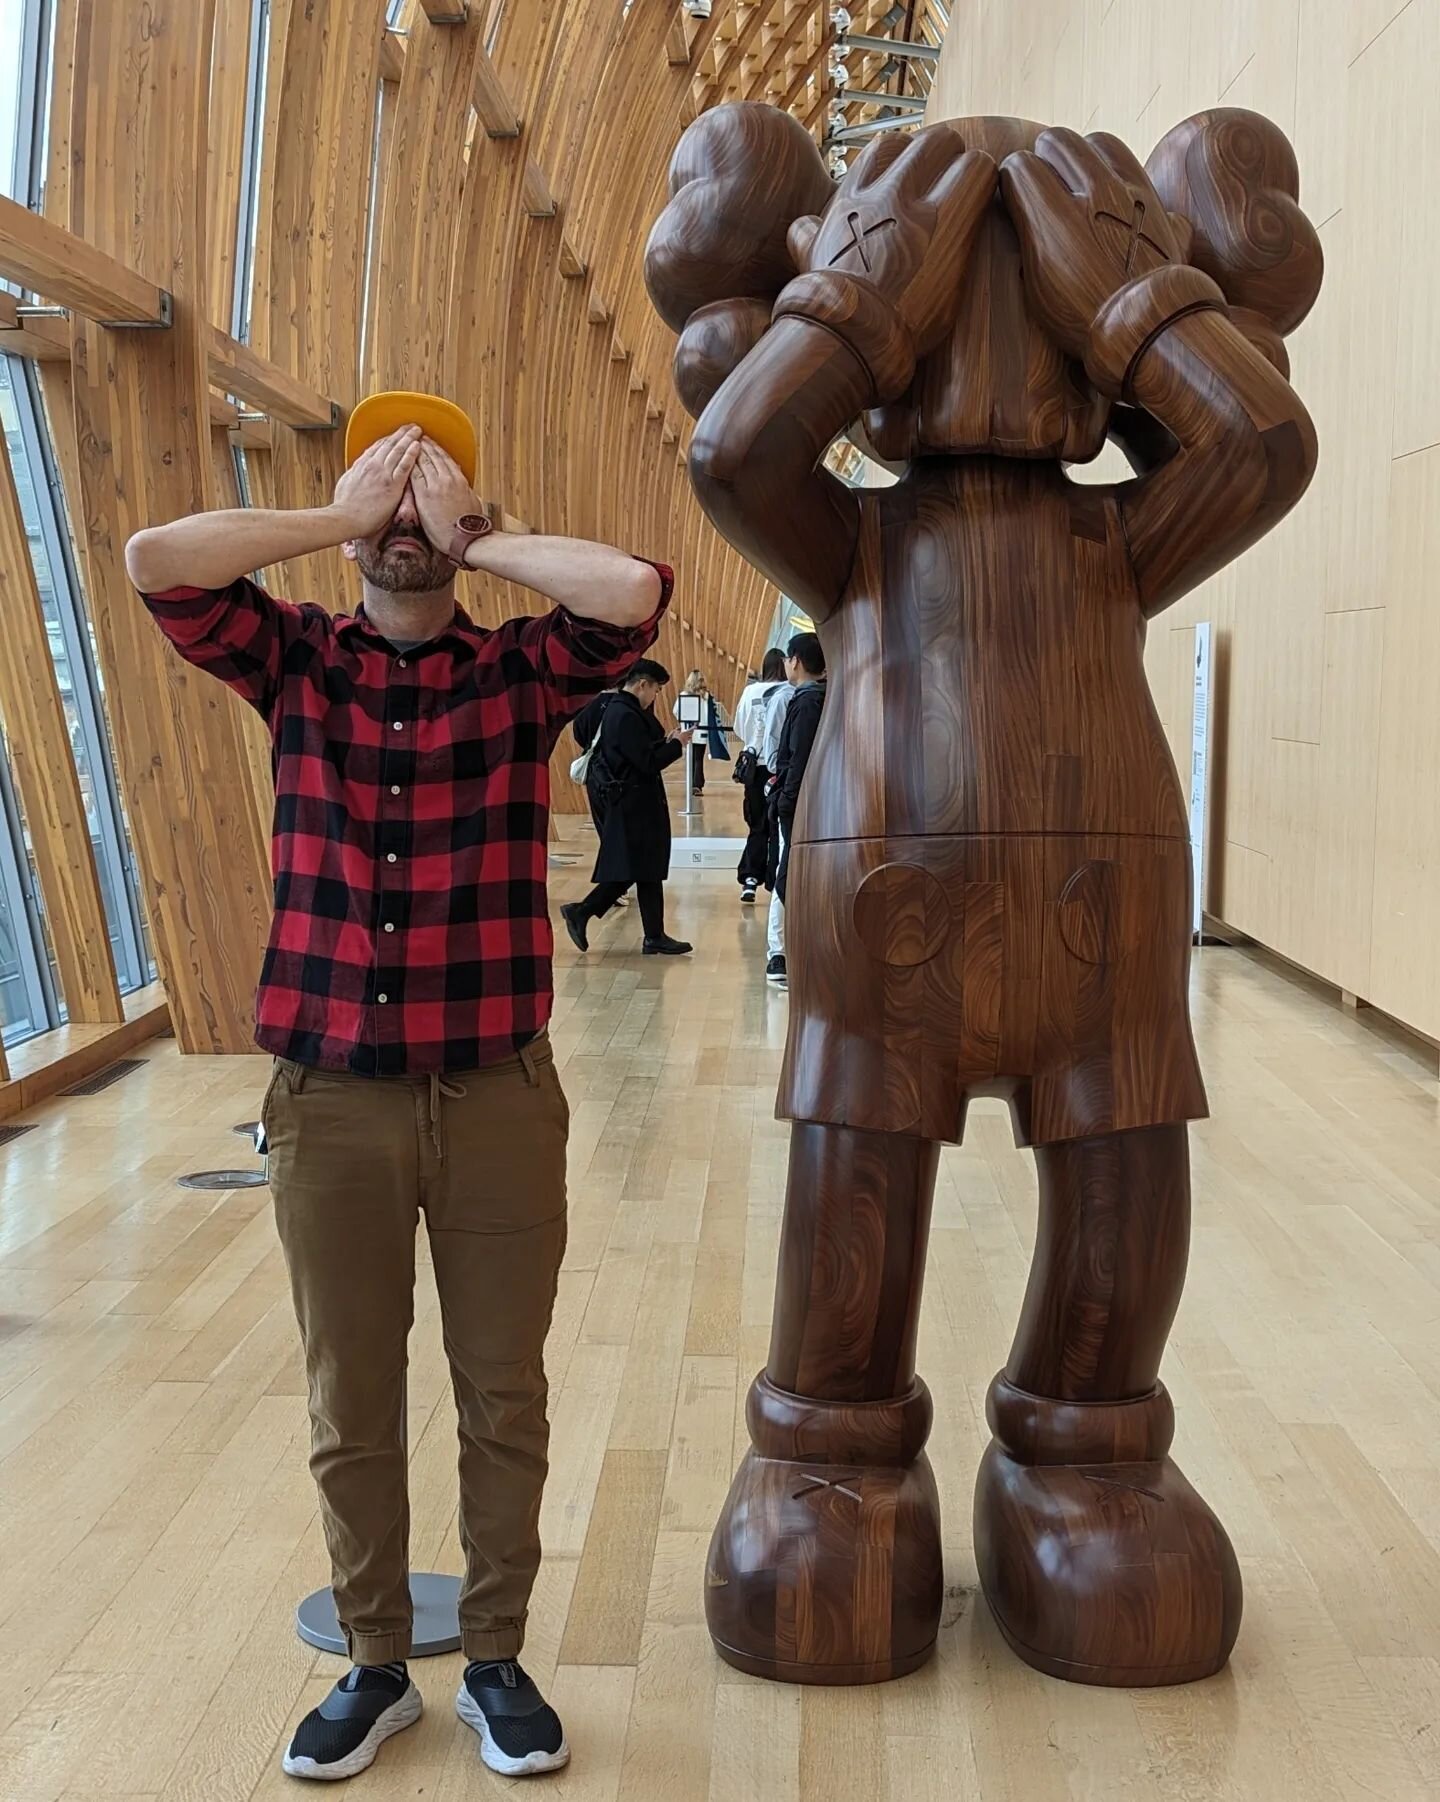 @kaws @agotoronto I feel like all I post is stories. Is it still woodworking with wooden artwork in timber art galleries? @frank.ghery if you haven't been to ago to see #kaws this is your reminder. #art #toronto